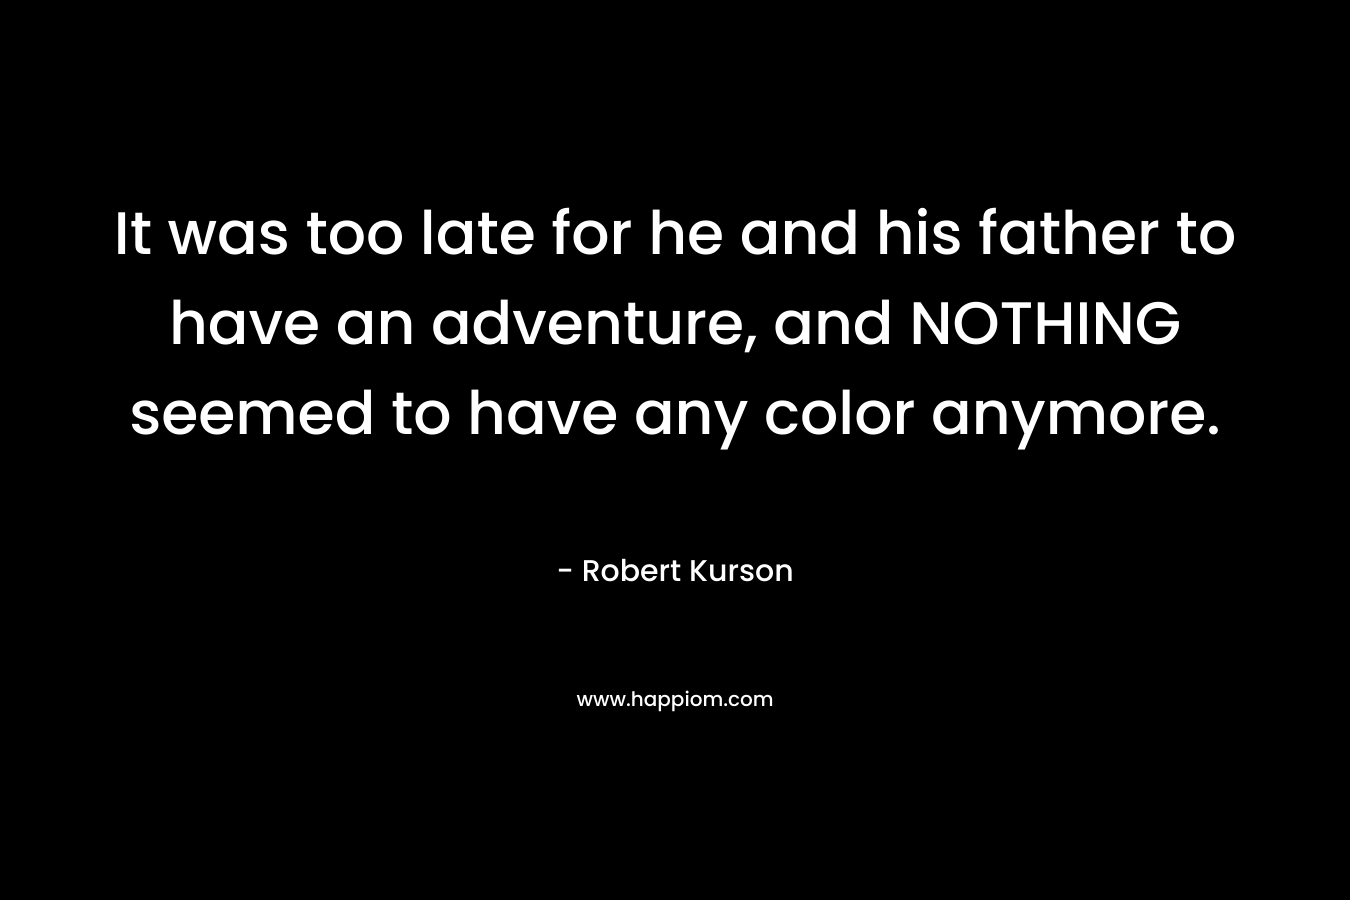 It was too late for he and his father to have an adventure, and NOTHING seemed to have any color anymore. – Robert Kurson